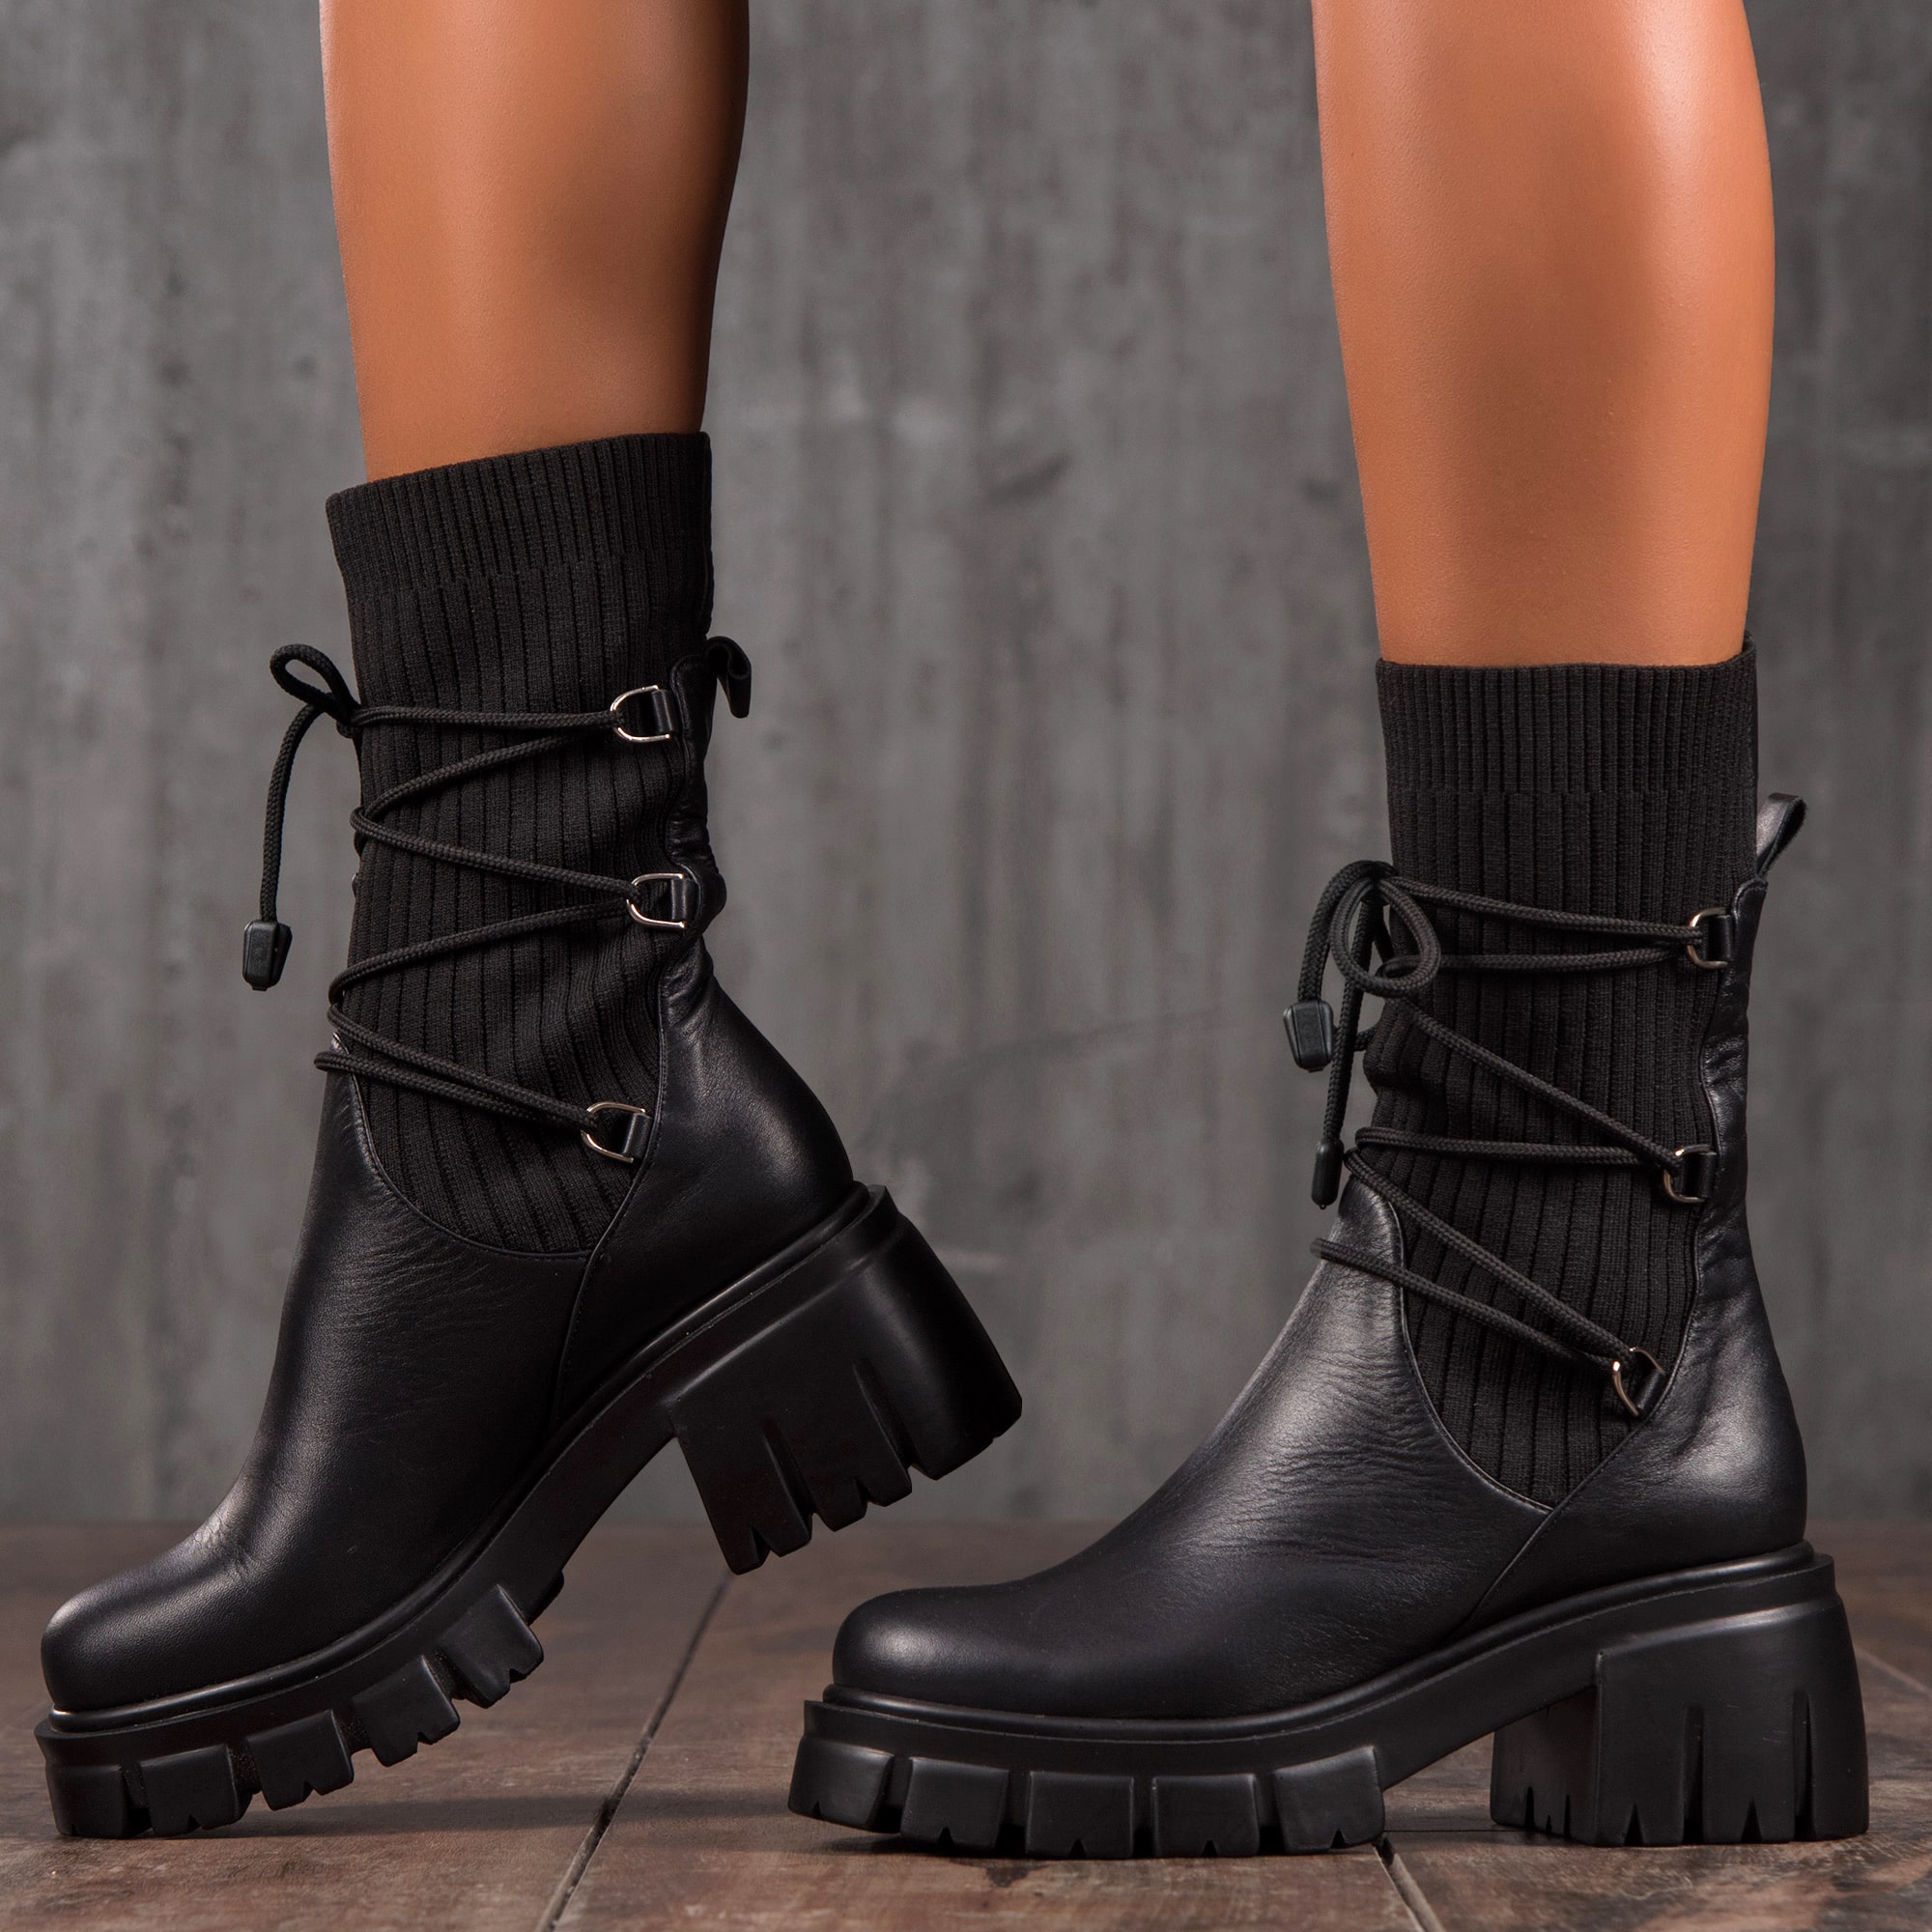 Theory Sock Boots, Black Color